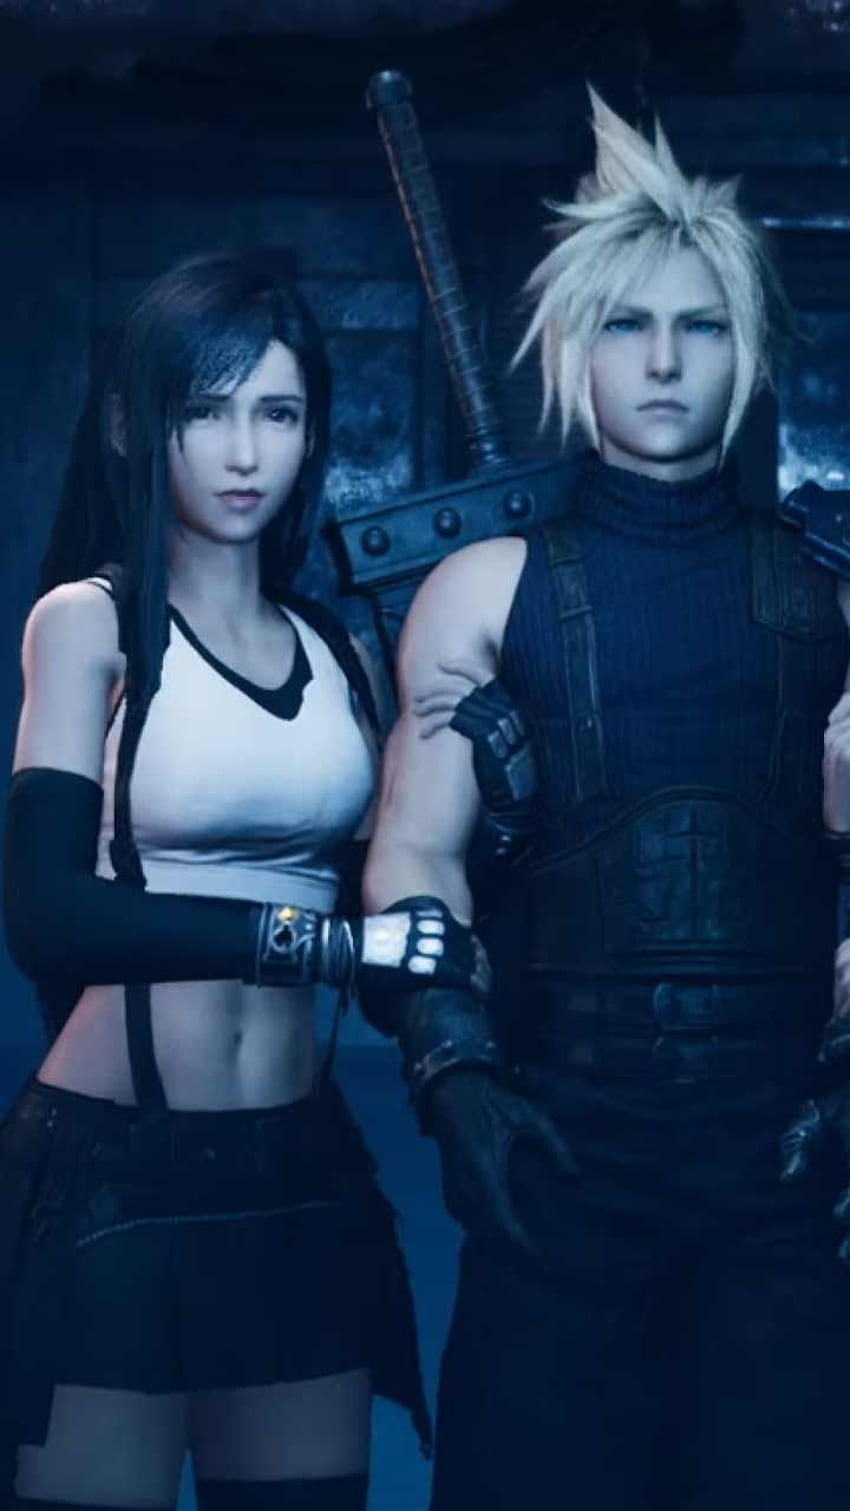 Final Fantasy 7 Remake phone background PS4 game art poster logo on iPhone android en 2020. Cloud and tifa, Final fantasy y Final fantasy 7 tifa fondo de pantalla del teléfono